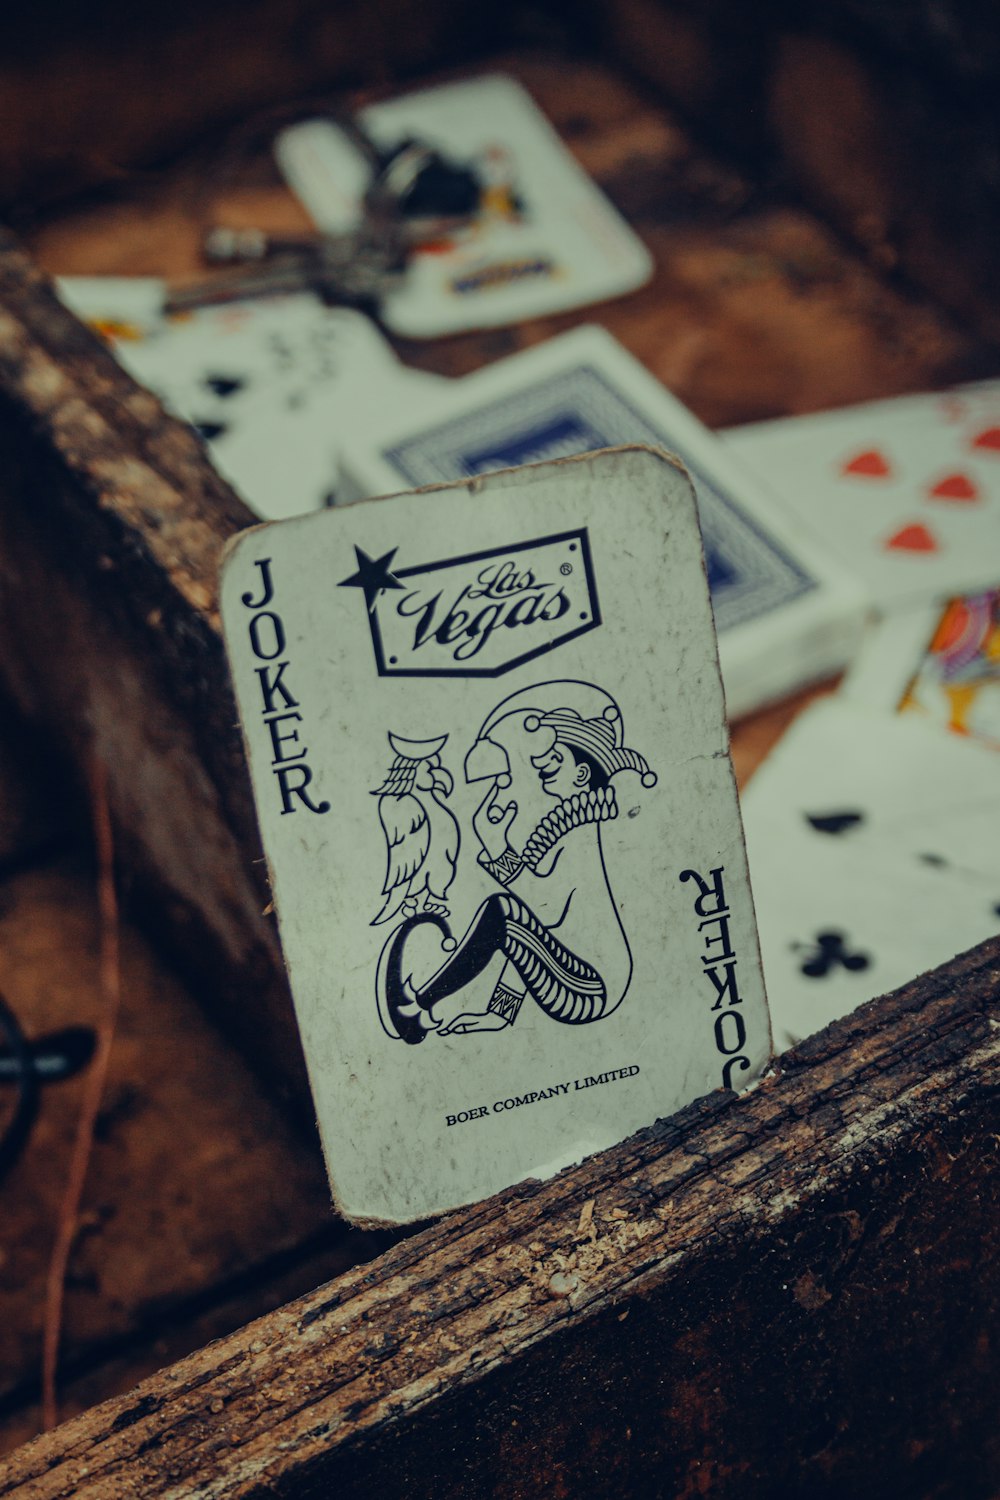 joker playing card on brown wooden table